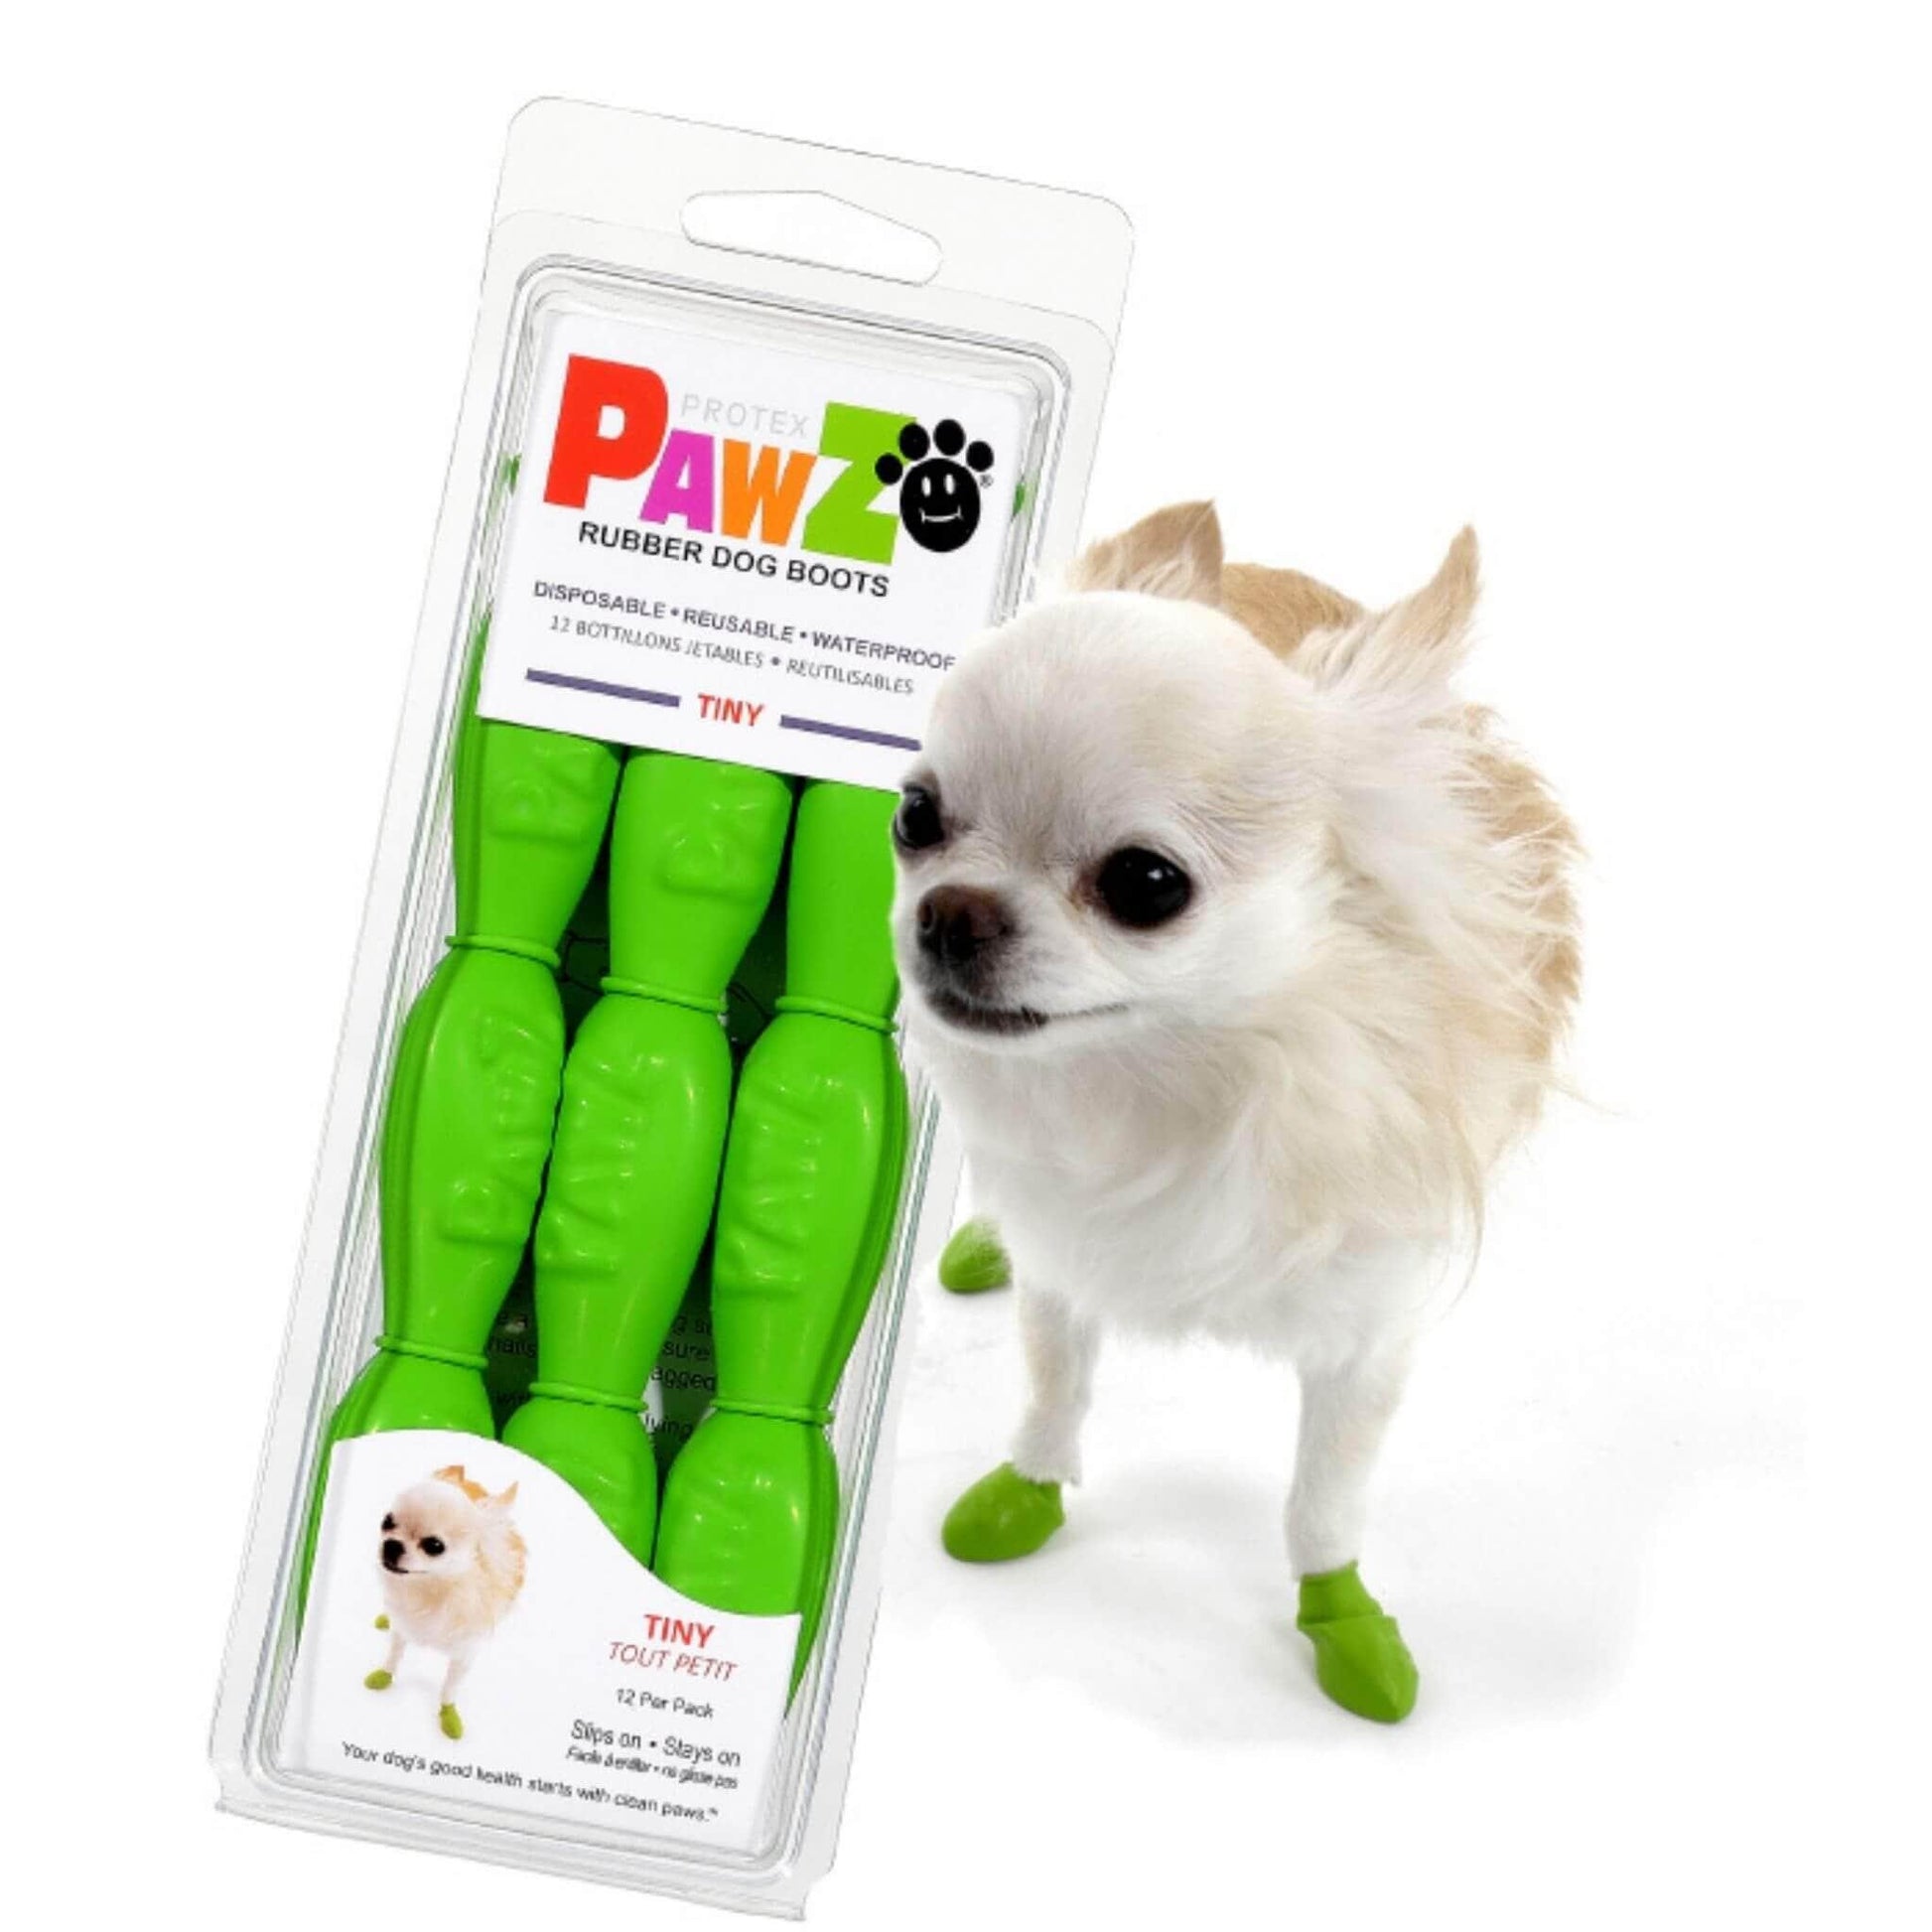 Chihuahua dog wearing Pawz tiny size dog boots in green